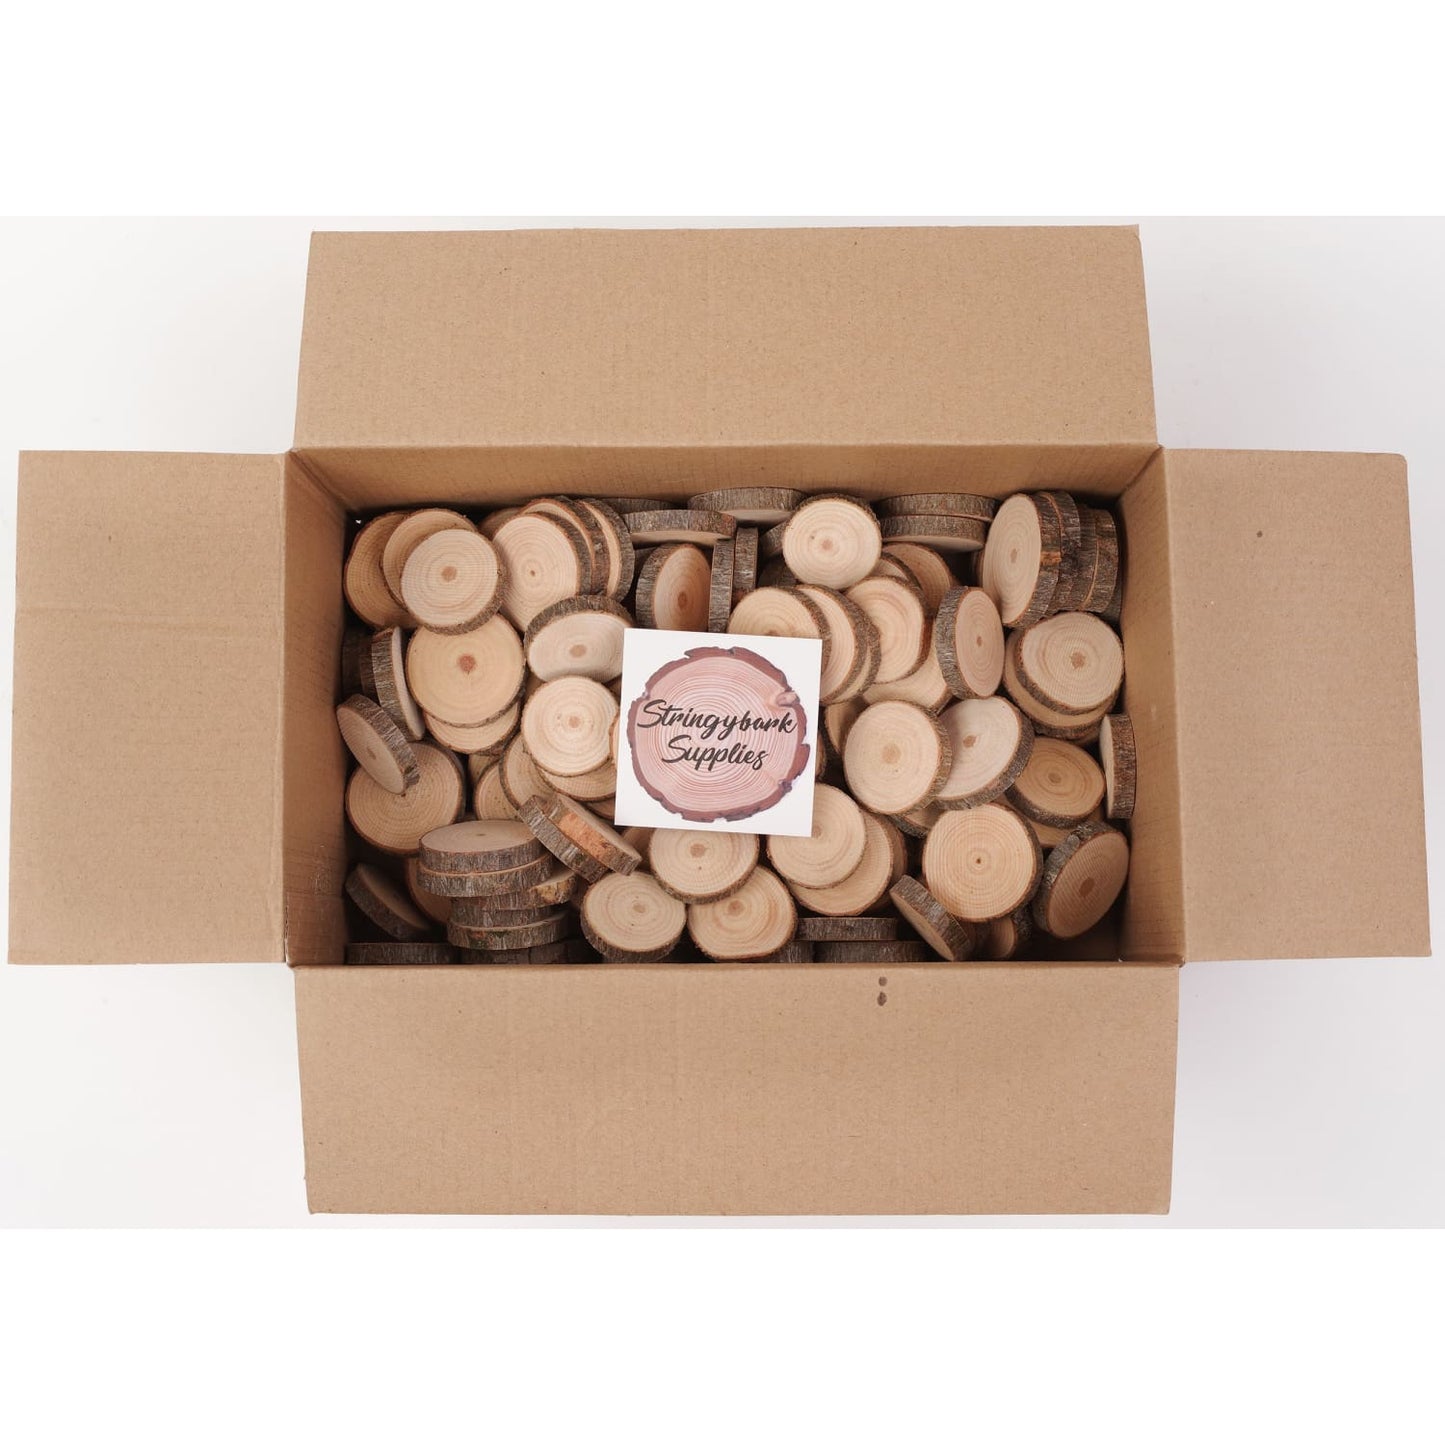 2 - 4 Cm Wood Slices (20 Pack) - Small Wood Slices